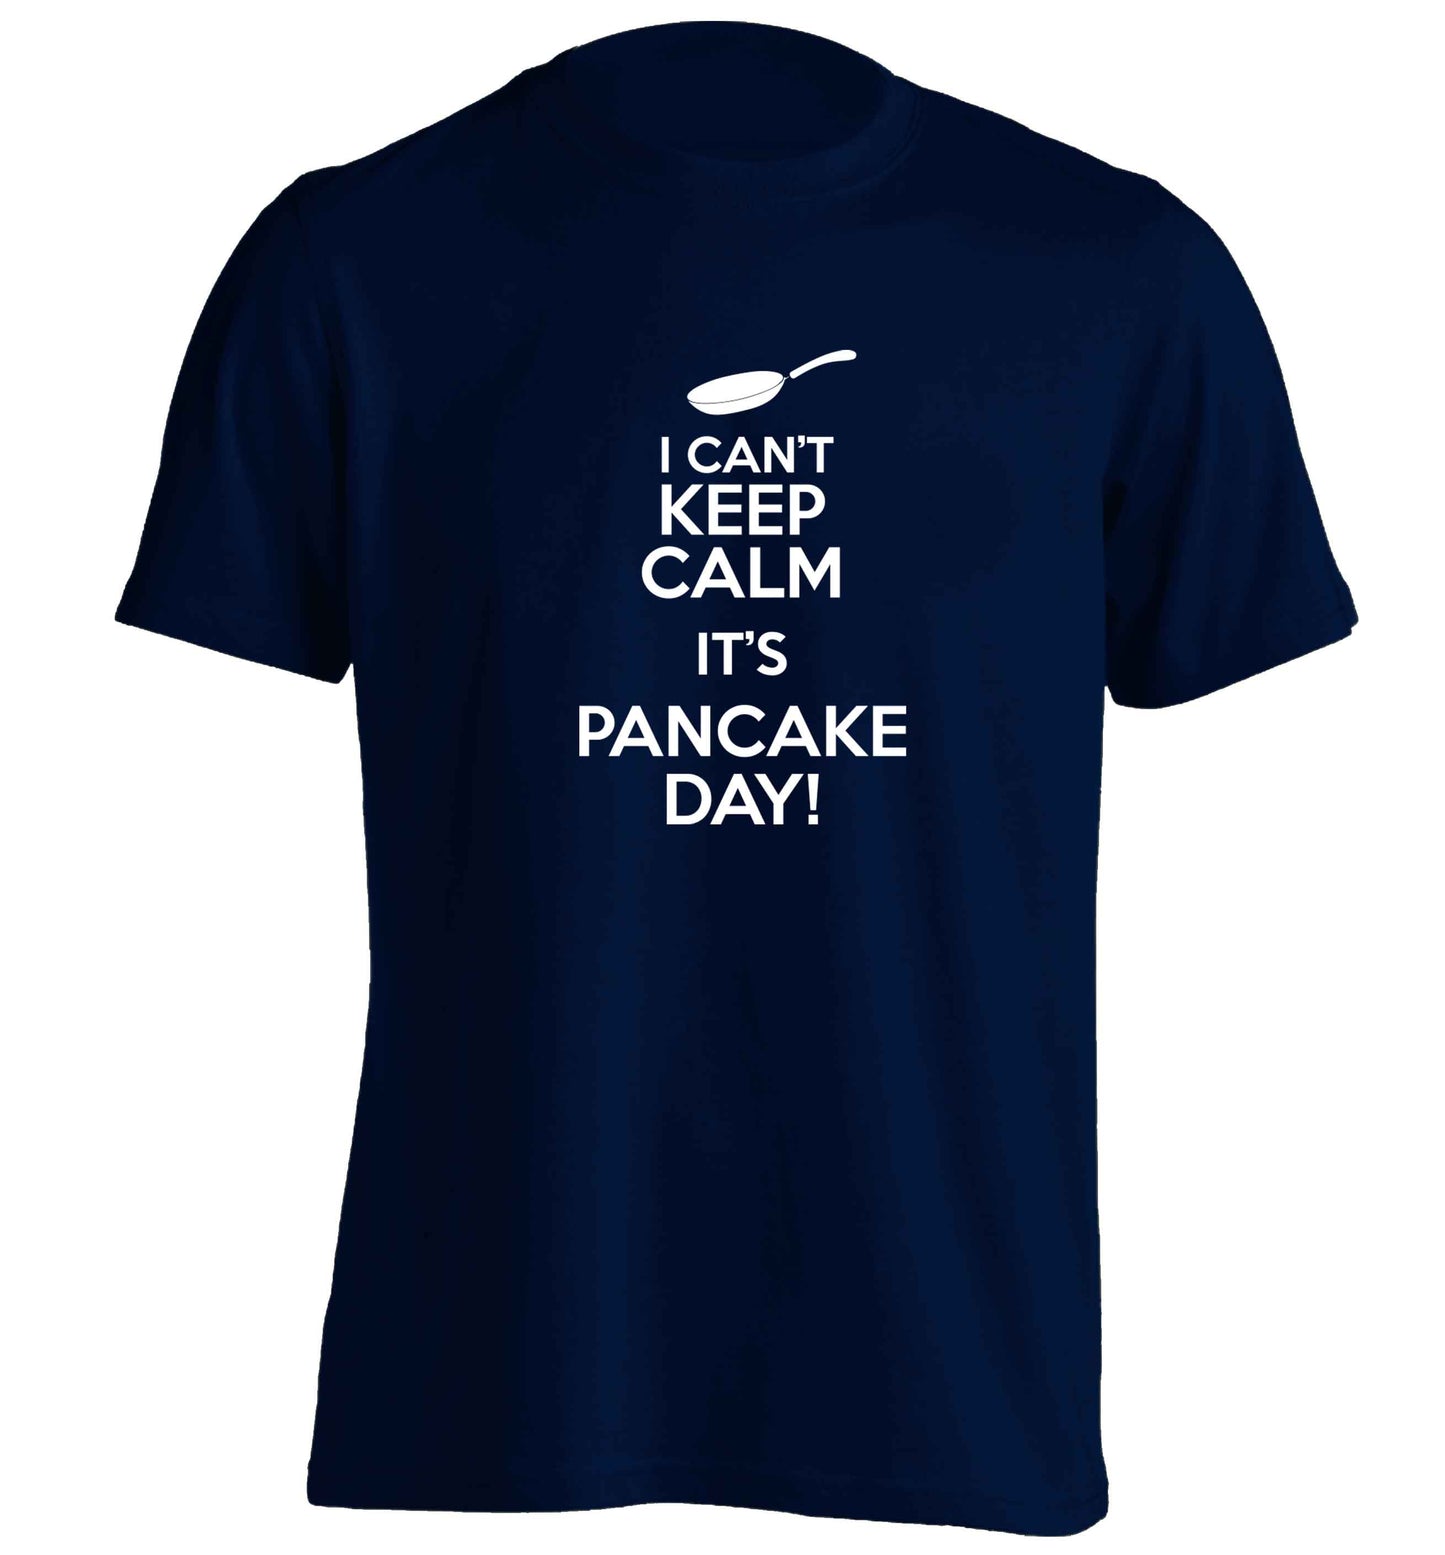 I can't keep calm it's pancake day! adults unisex navy Tshirt 2XL